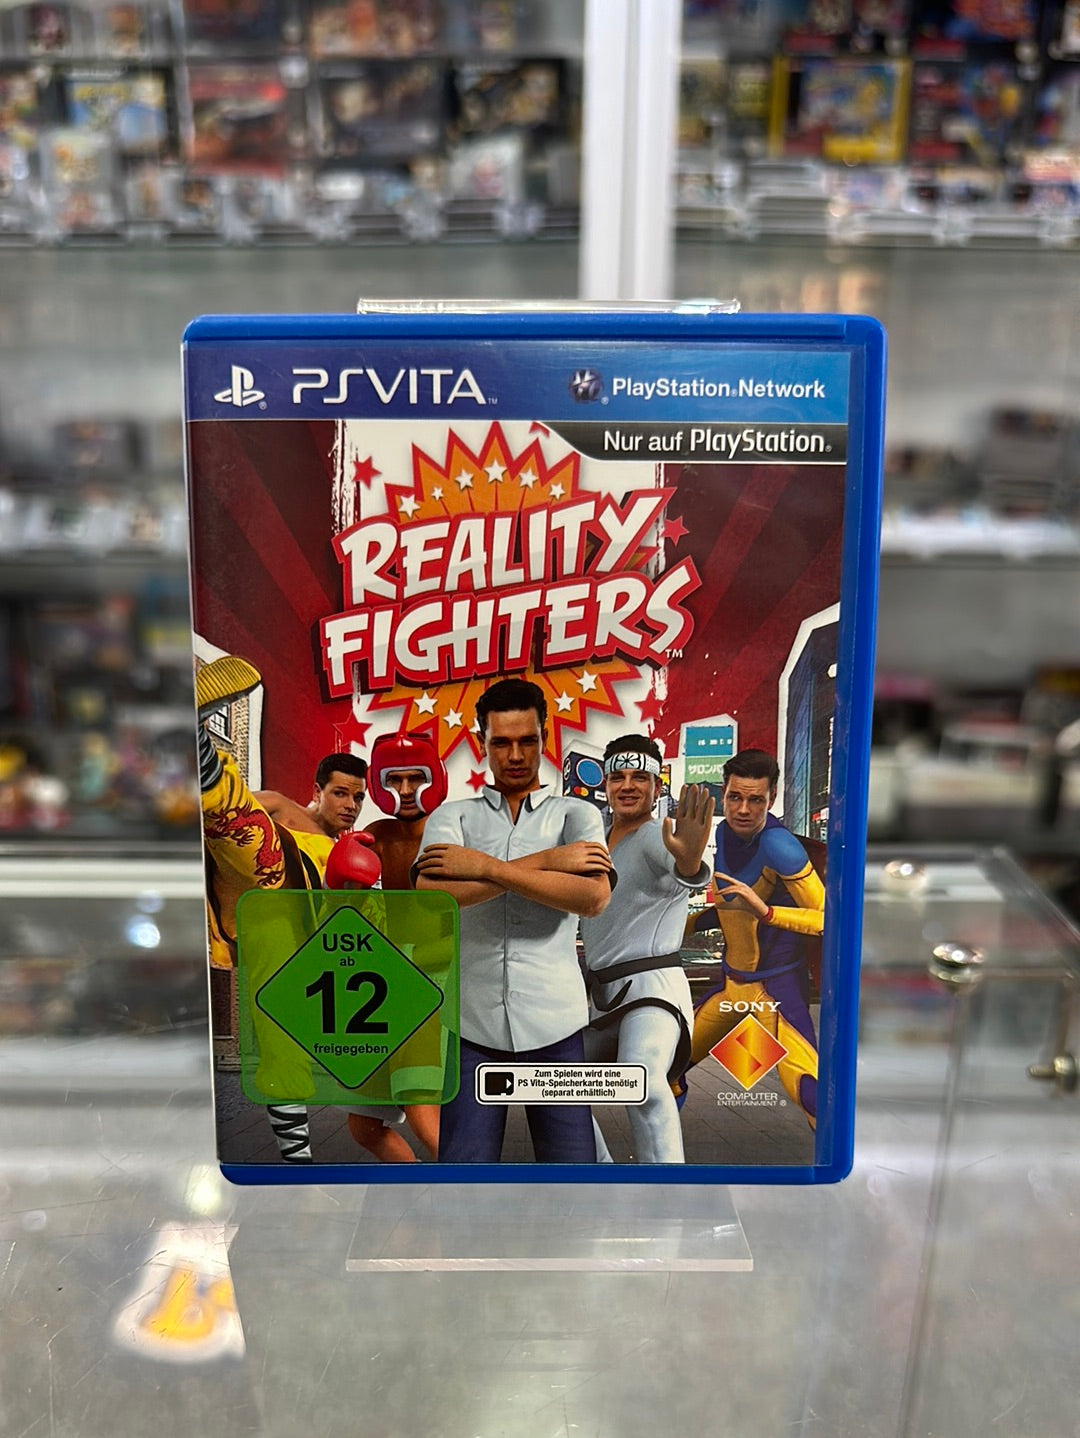 PS Vita Reality Fighters